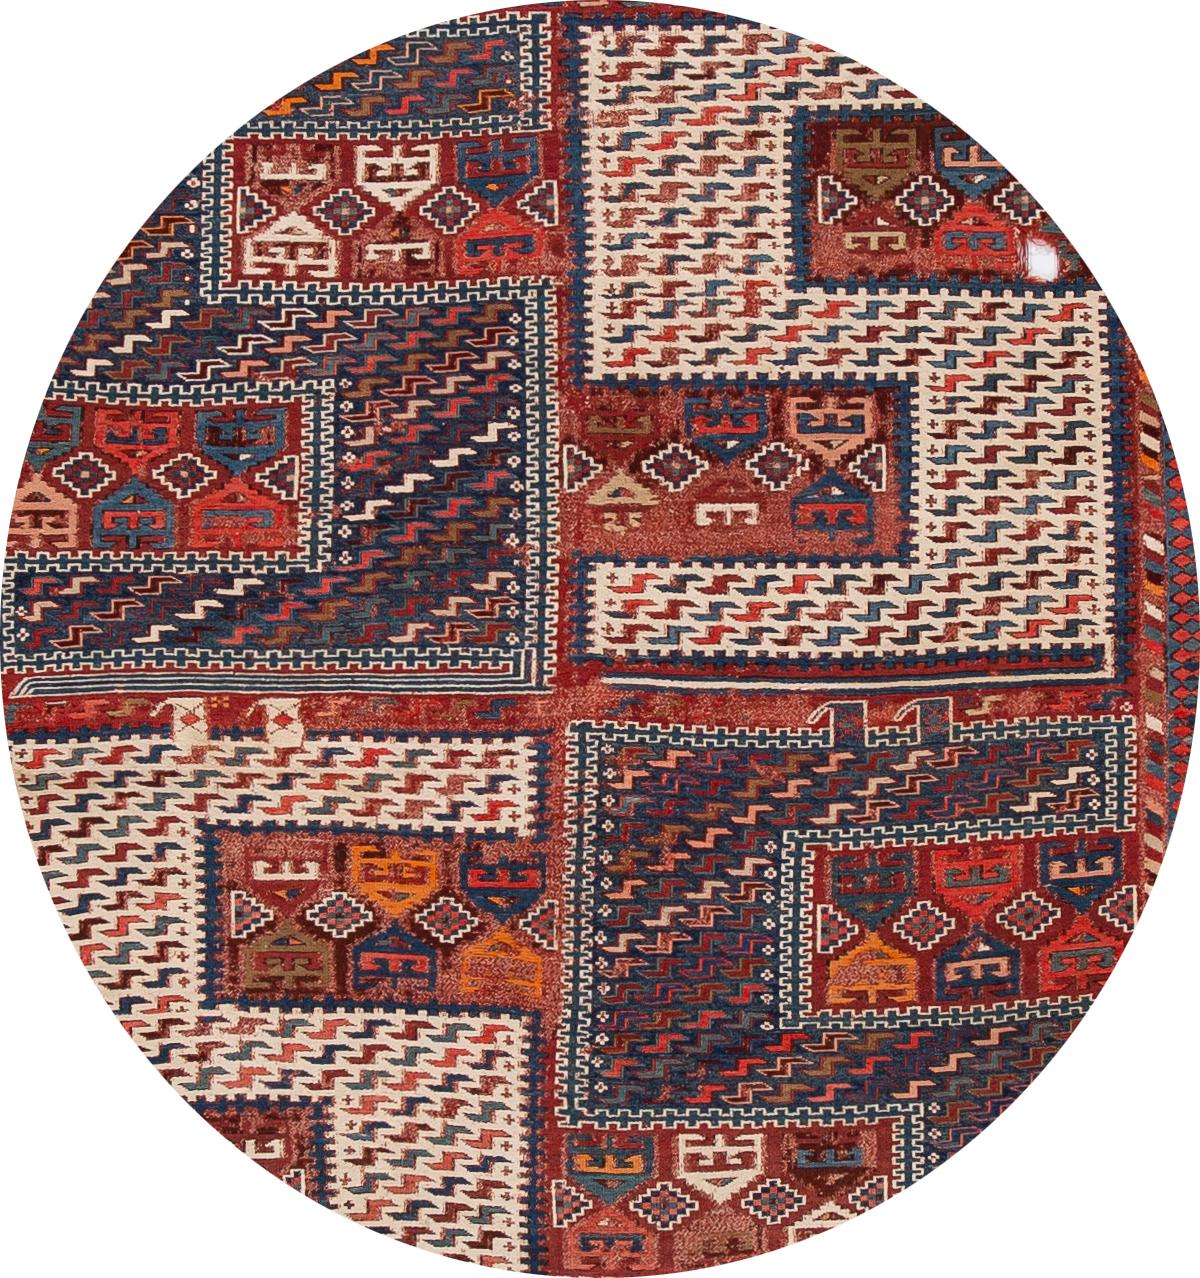 Beautiful antique Caucasian Verneh Sileh Soumak fragment rug, hand knotted wool with a rust field, blue, ivory and orange accents in a multi medallion geometric design,

circa 180s.
This rug measured 3' 10